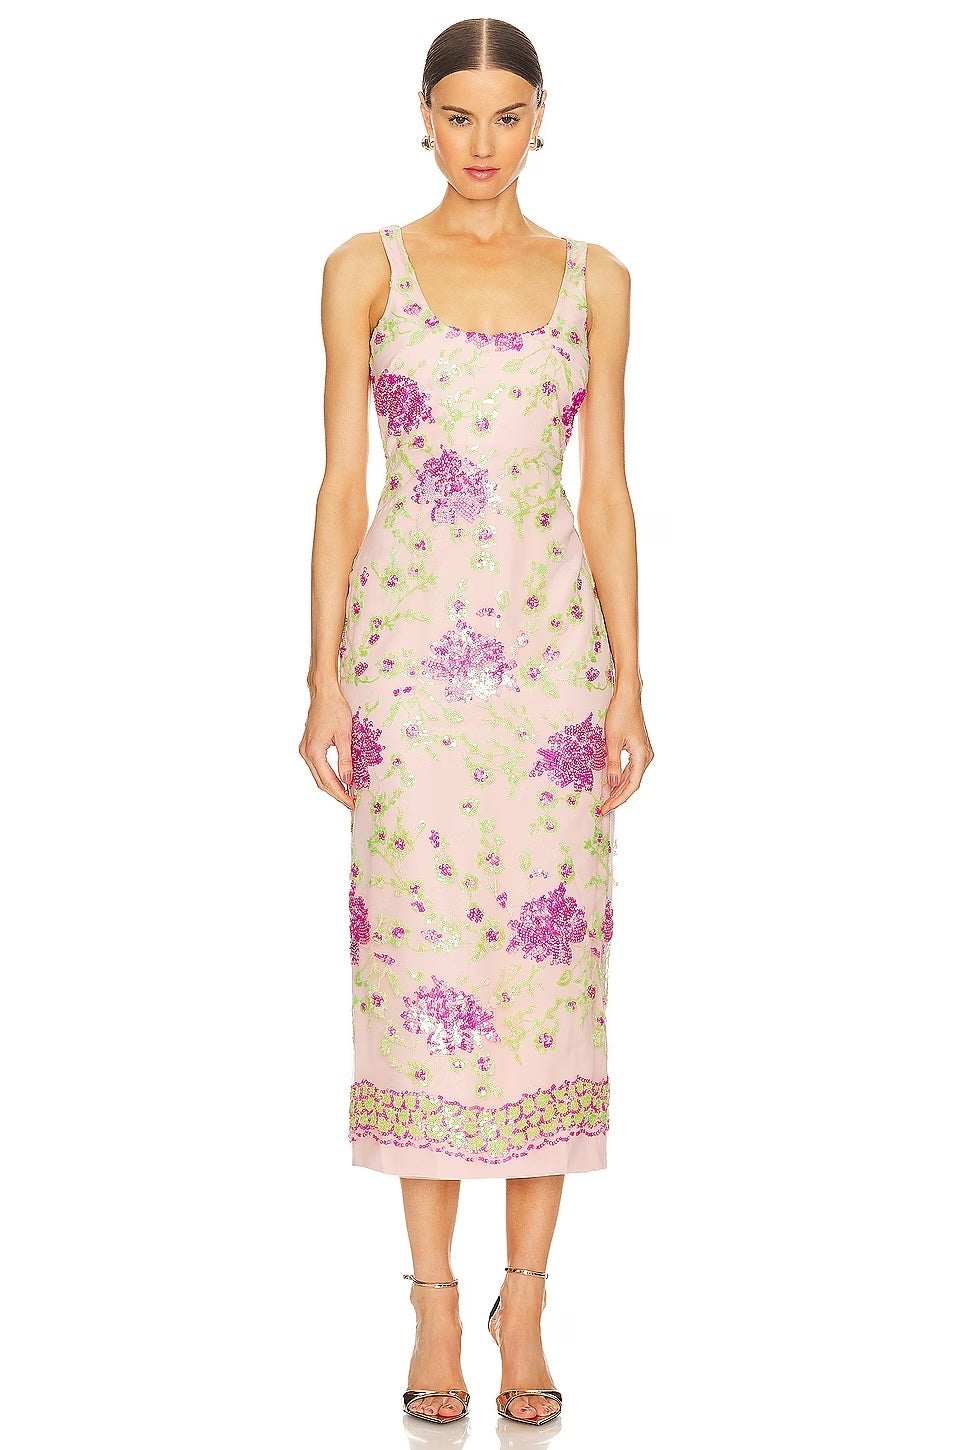 Likely clementina dress